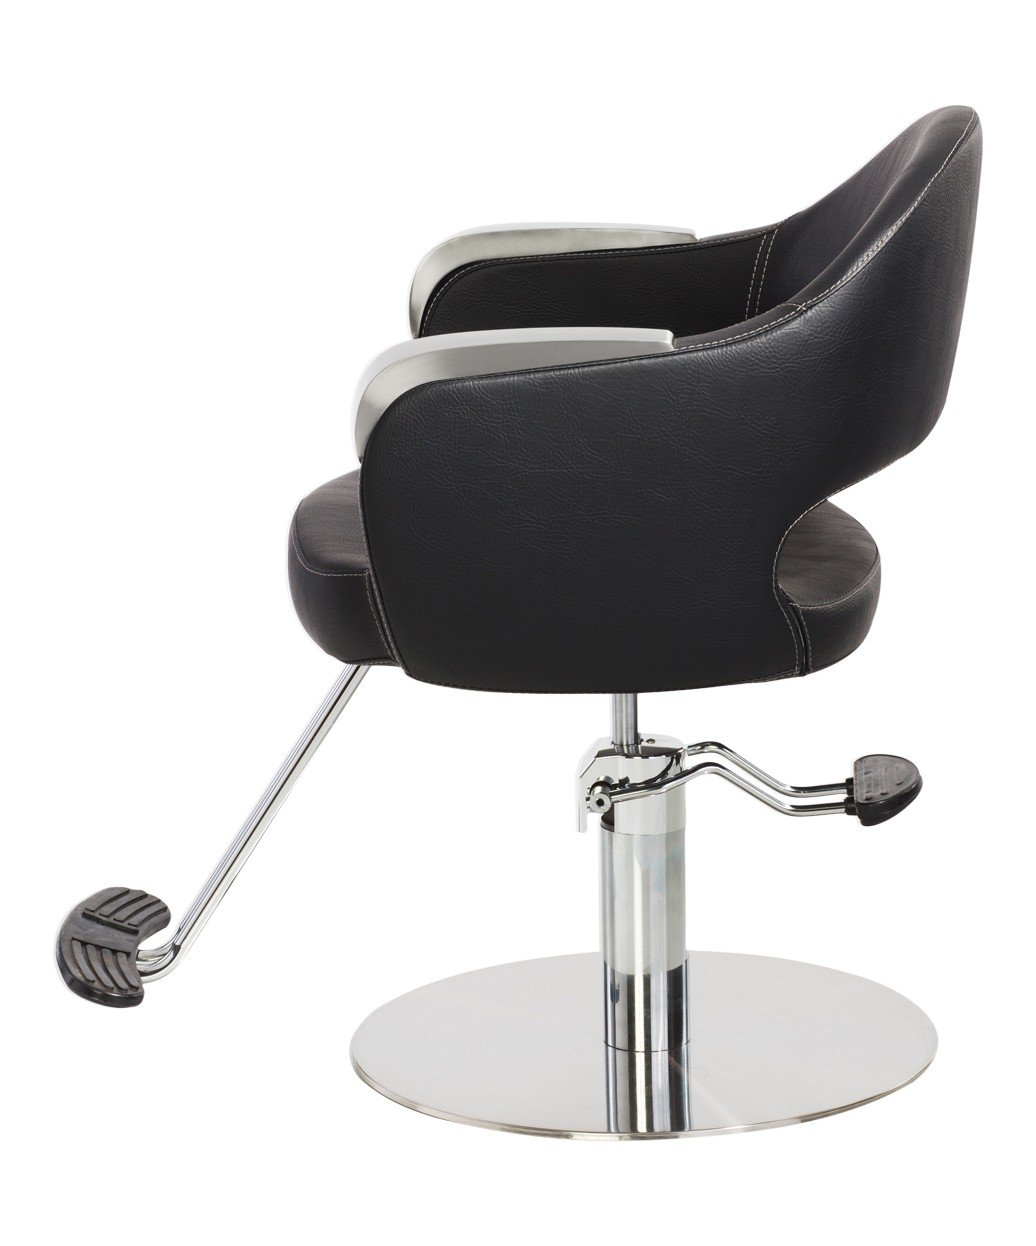 Luna Styling Chair: Stainless Steel Hydraulic Salon Chair from Buy-Rite